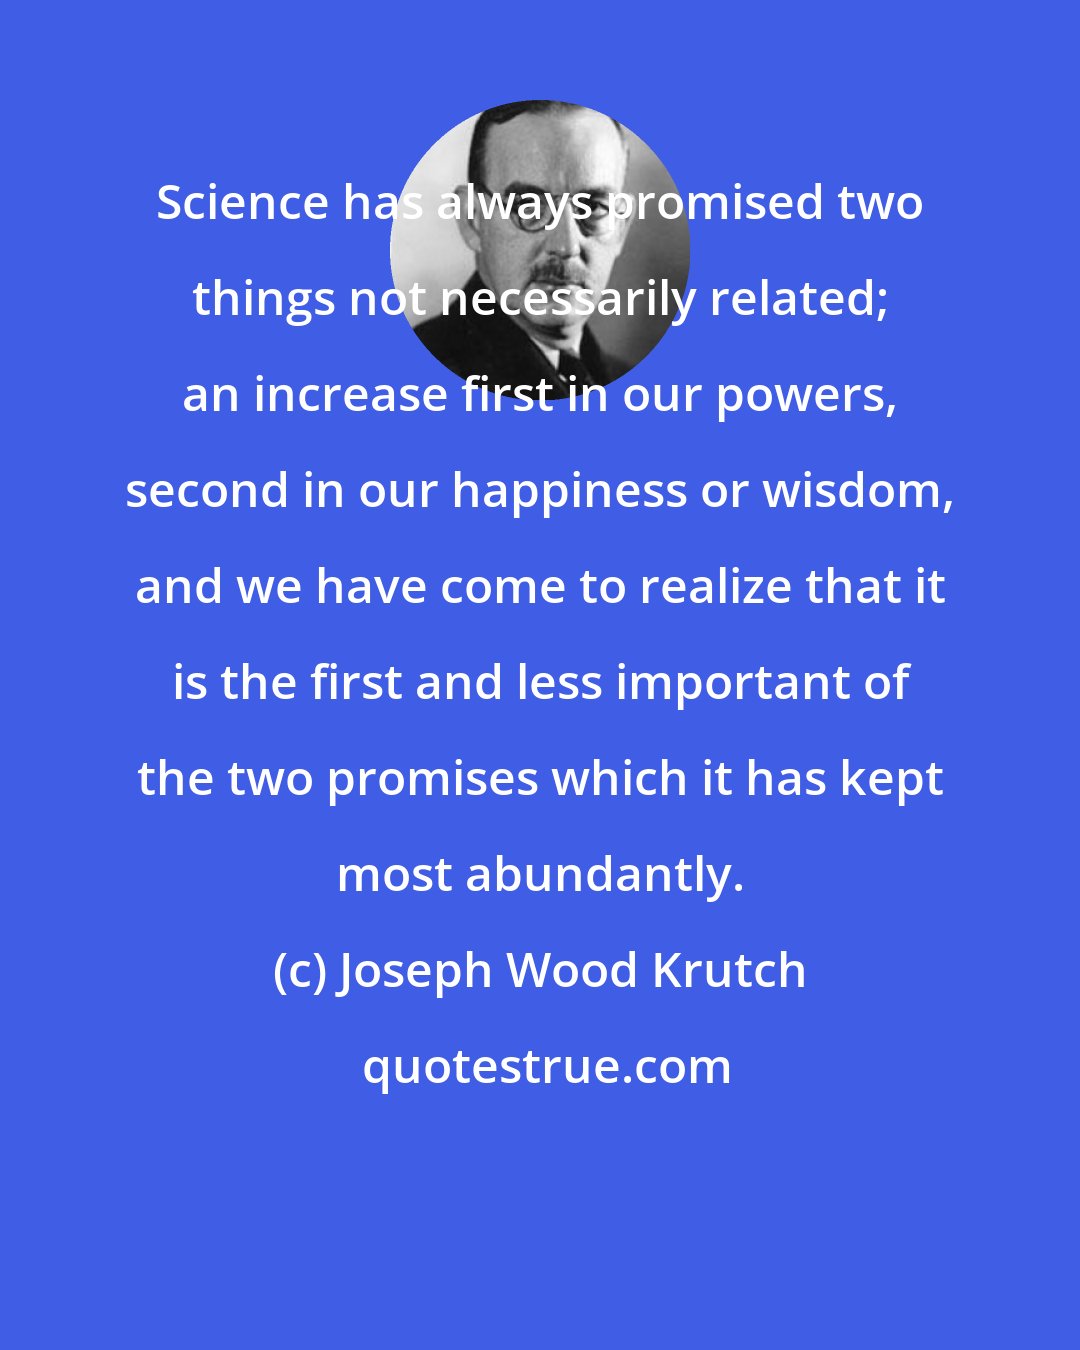 Joseph Wood Krutch: Science has always promised two things not necessarily related; an increase first in our powers, second in our happiness or wisdom, and we have come to realize that it is the first and less important of the two promises which it has kept most abundantly.